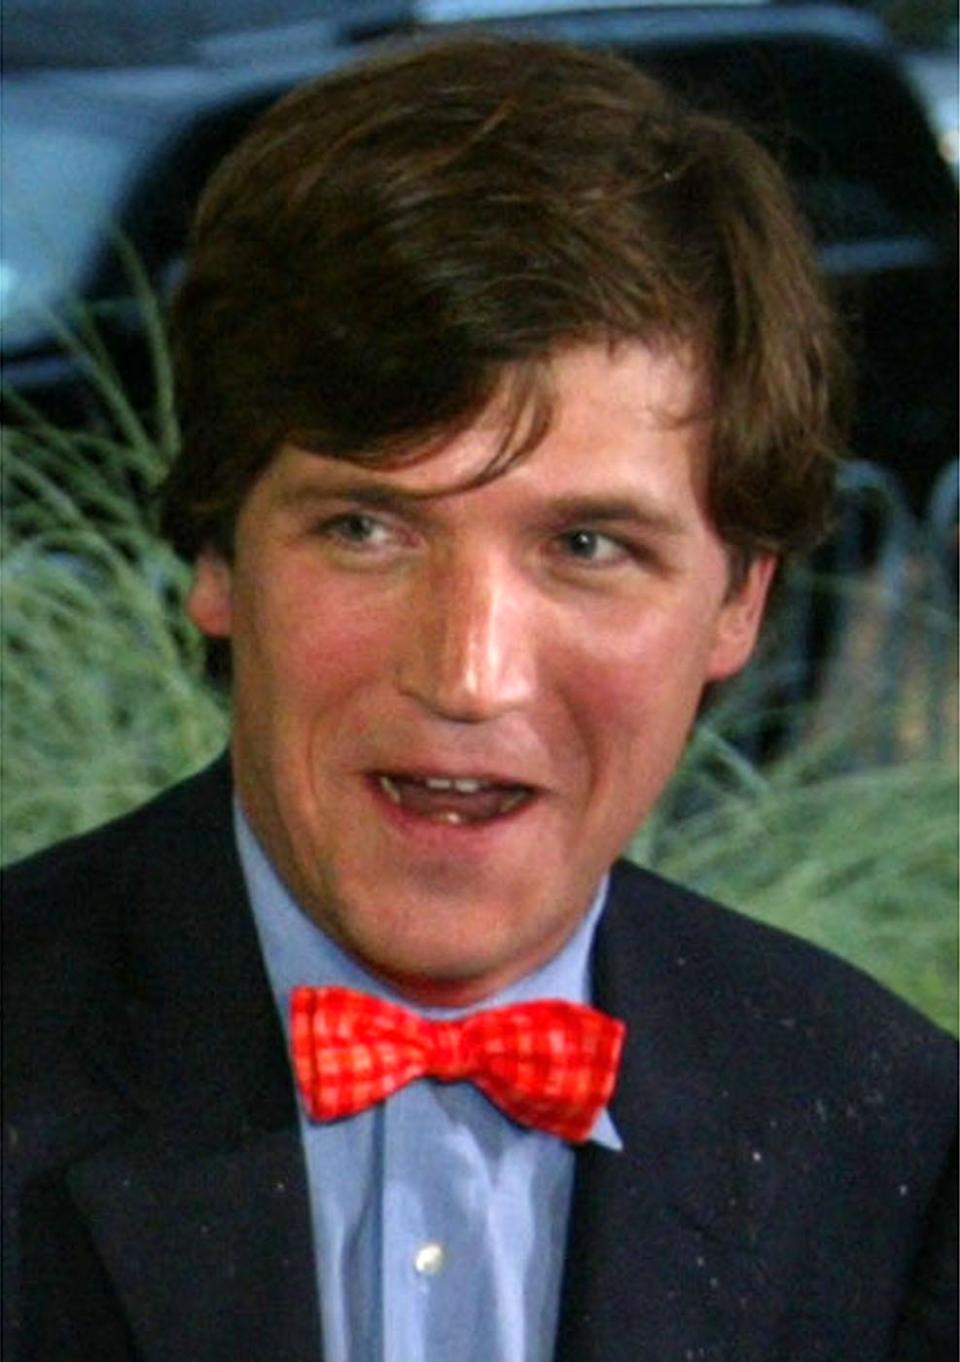 CNN's "Crossfire" panelist Tucker Carlson attends the premiere of the television show "K Street" in Washington, Friday, Sept. 12, 2003.